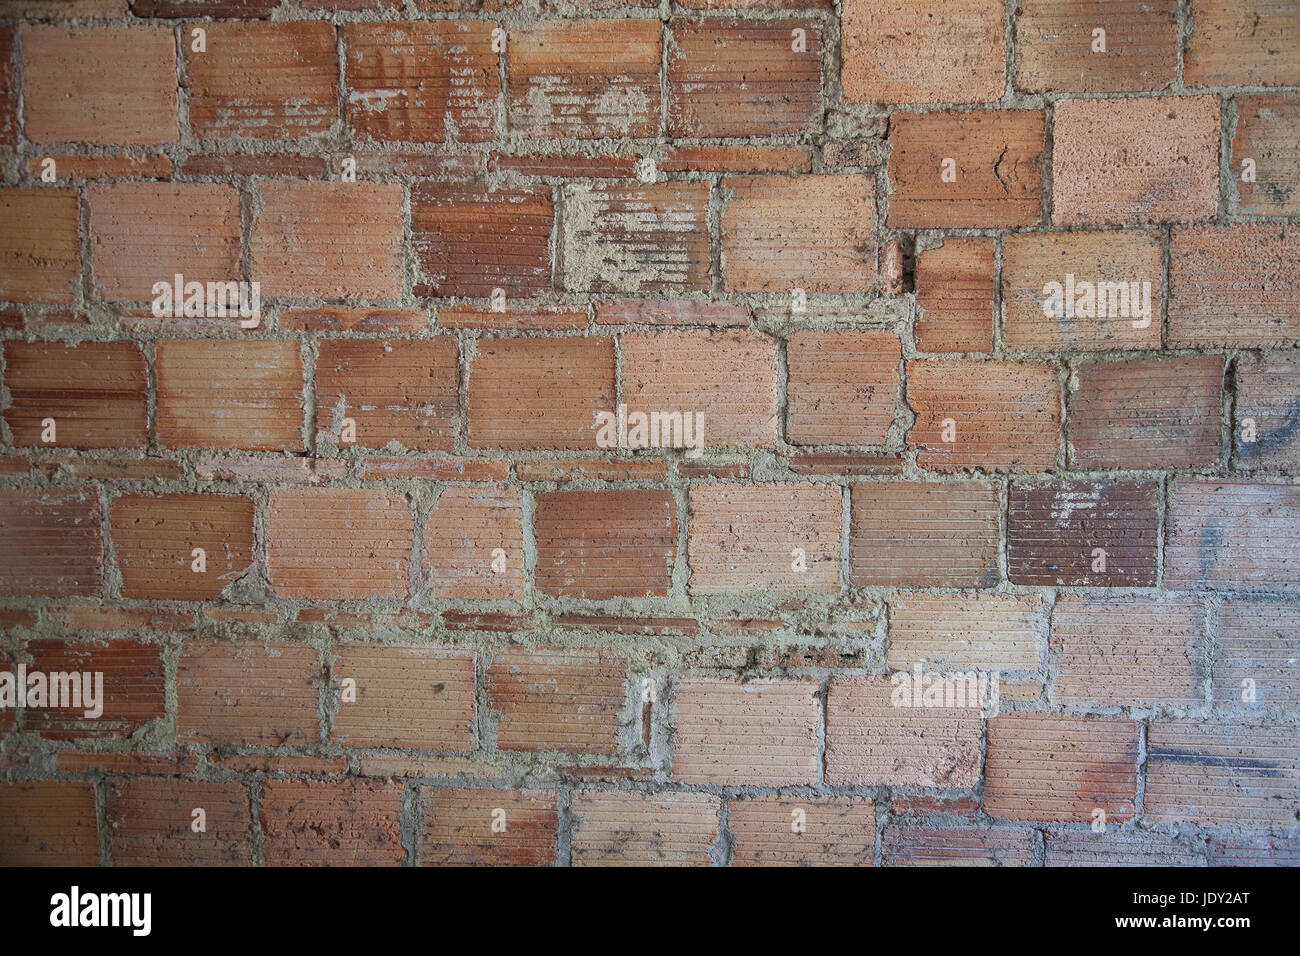 Abstract reddish bricks background gritty texture. Stock Photo